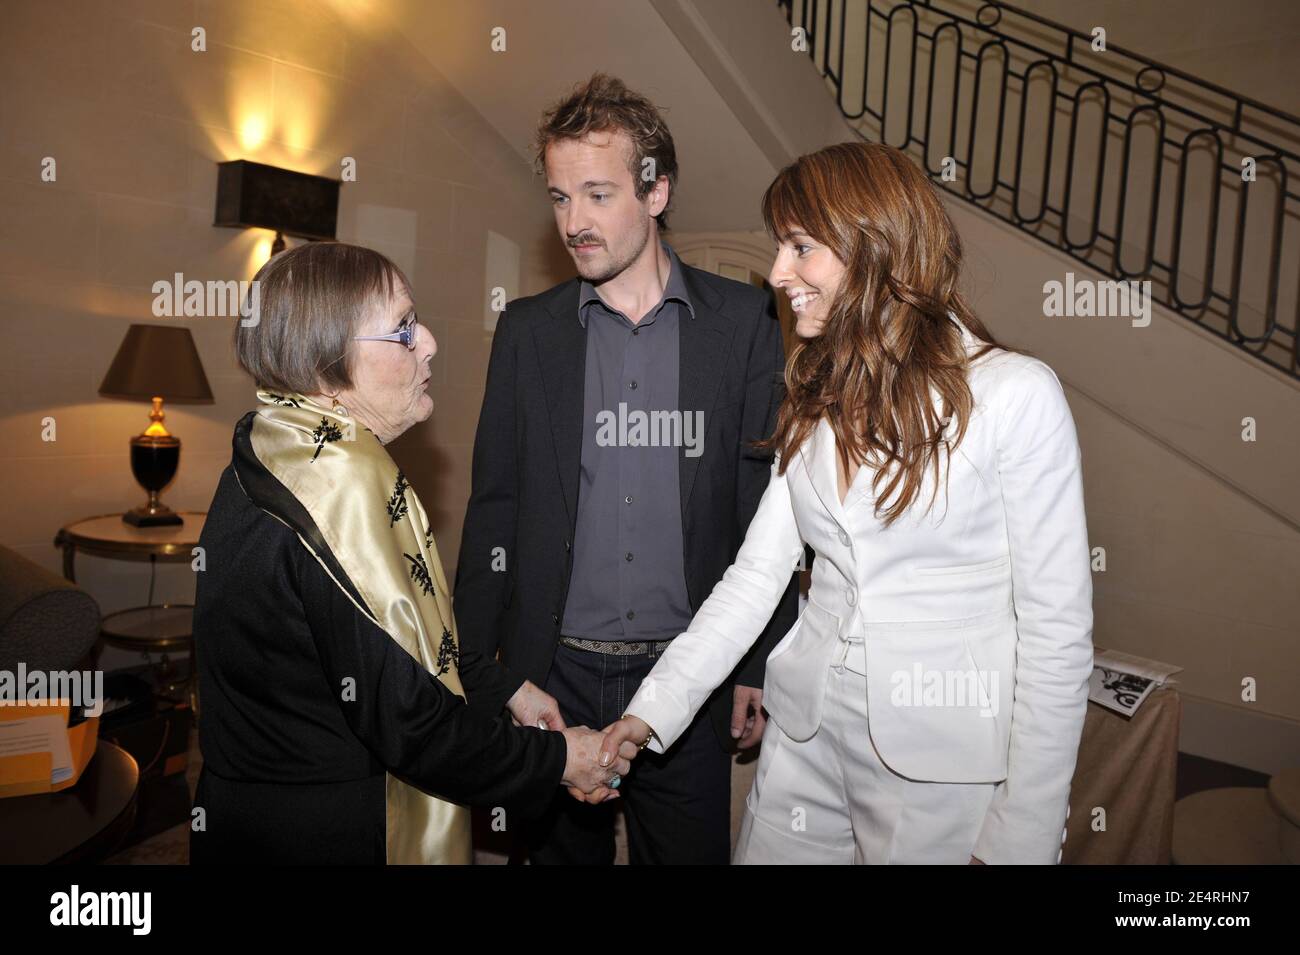 French actors Audrey Dana and Jocelyn Quivrin, winners of cinema prize 'Prix Romy Schneider-Patrick Dewaere 2008' meet with Patrick Dewaere's mother Mado Maurin inside Royal Monceau Hotel in Paris, France on March 17, 2008 prior to the official award ceremony. Photo by Christophe Guibbaud/ABACAPRESS.COM Stock Photo